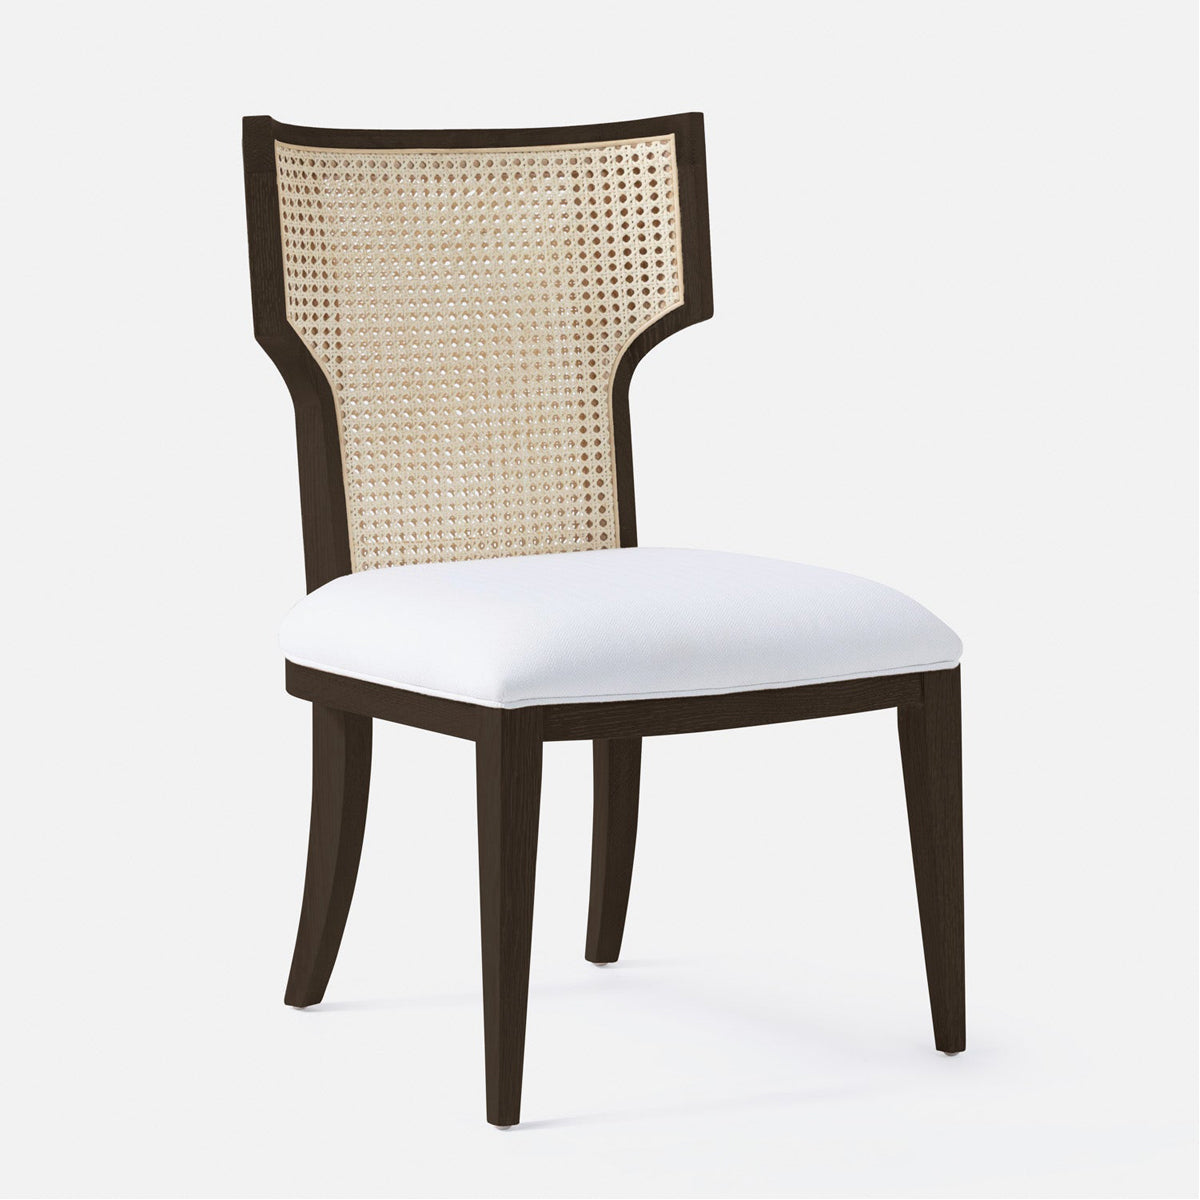 Made Goods Carleen Wingback Cane Dining Chair in Volta Fabric